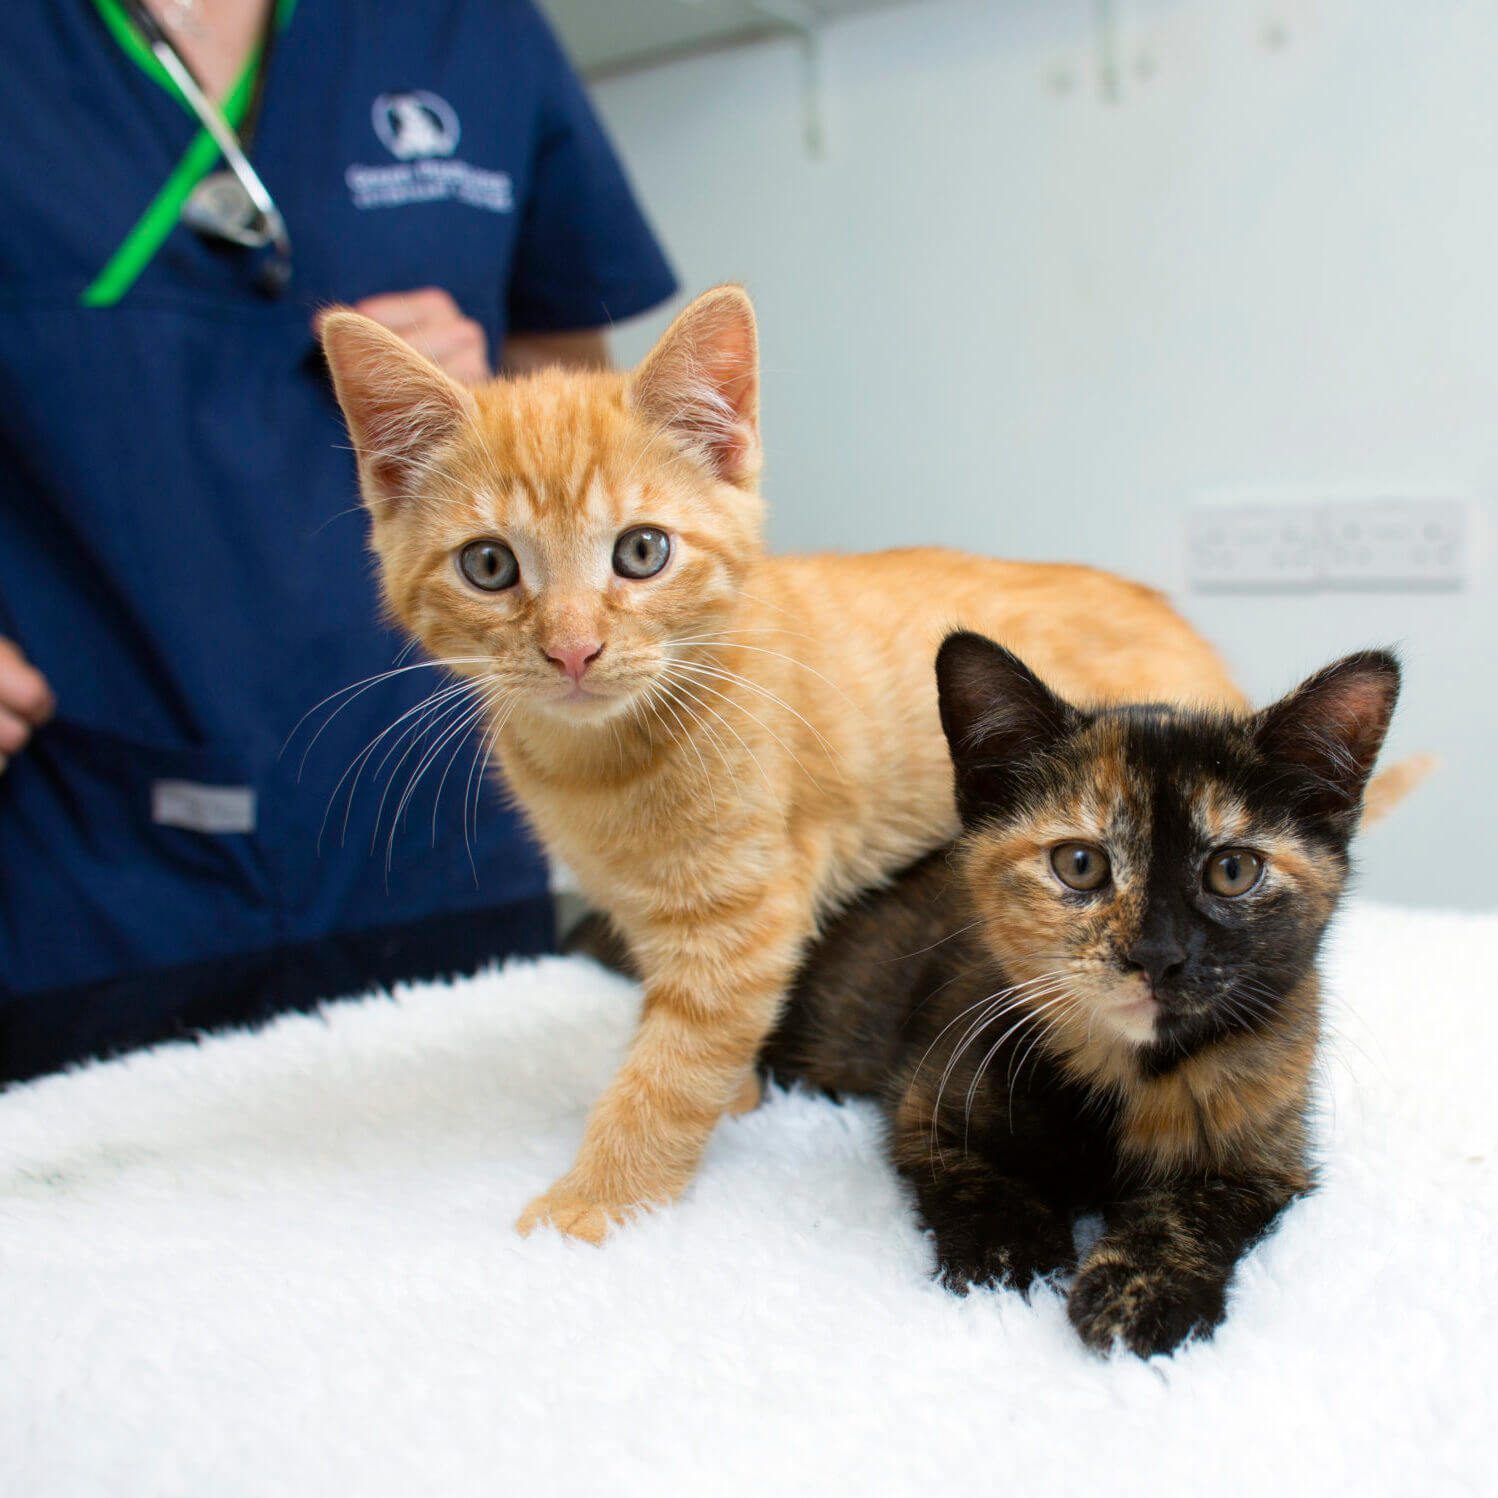 Two Kittens On Exam Table